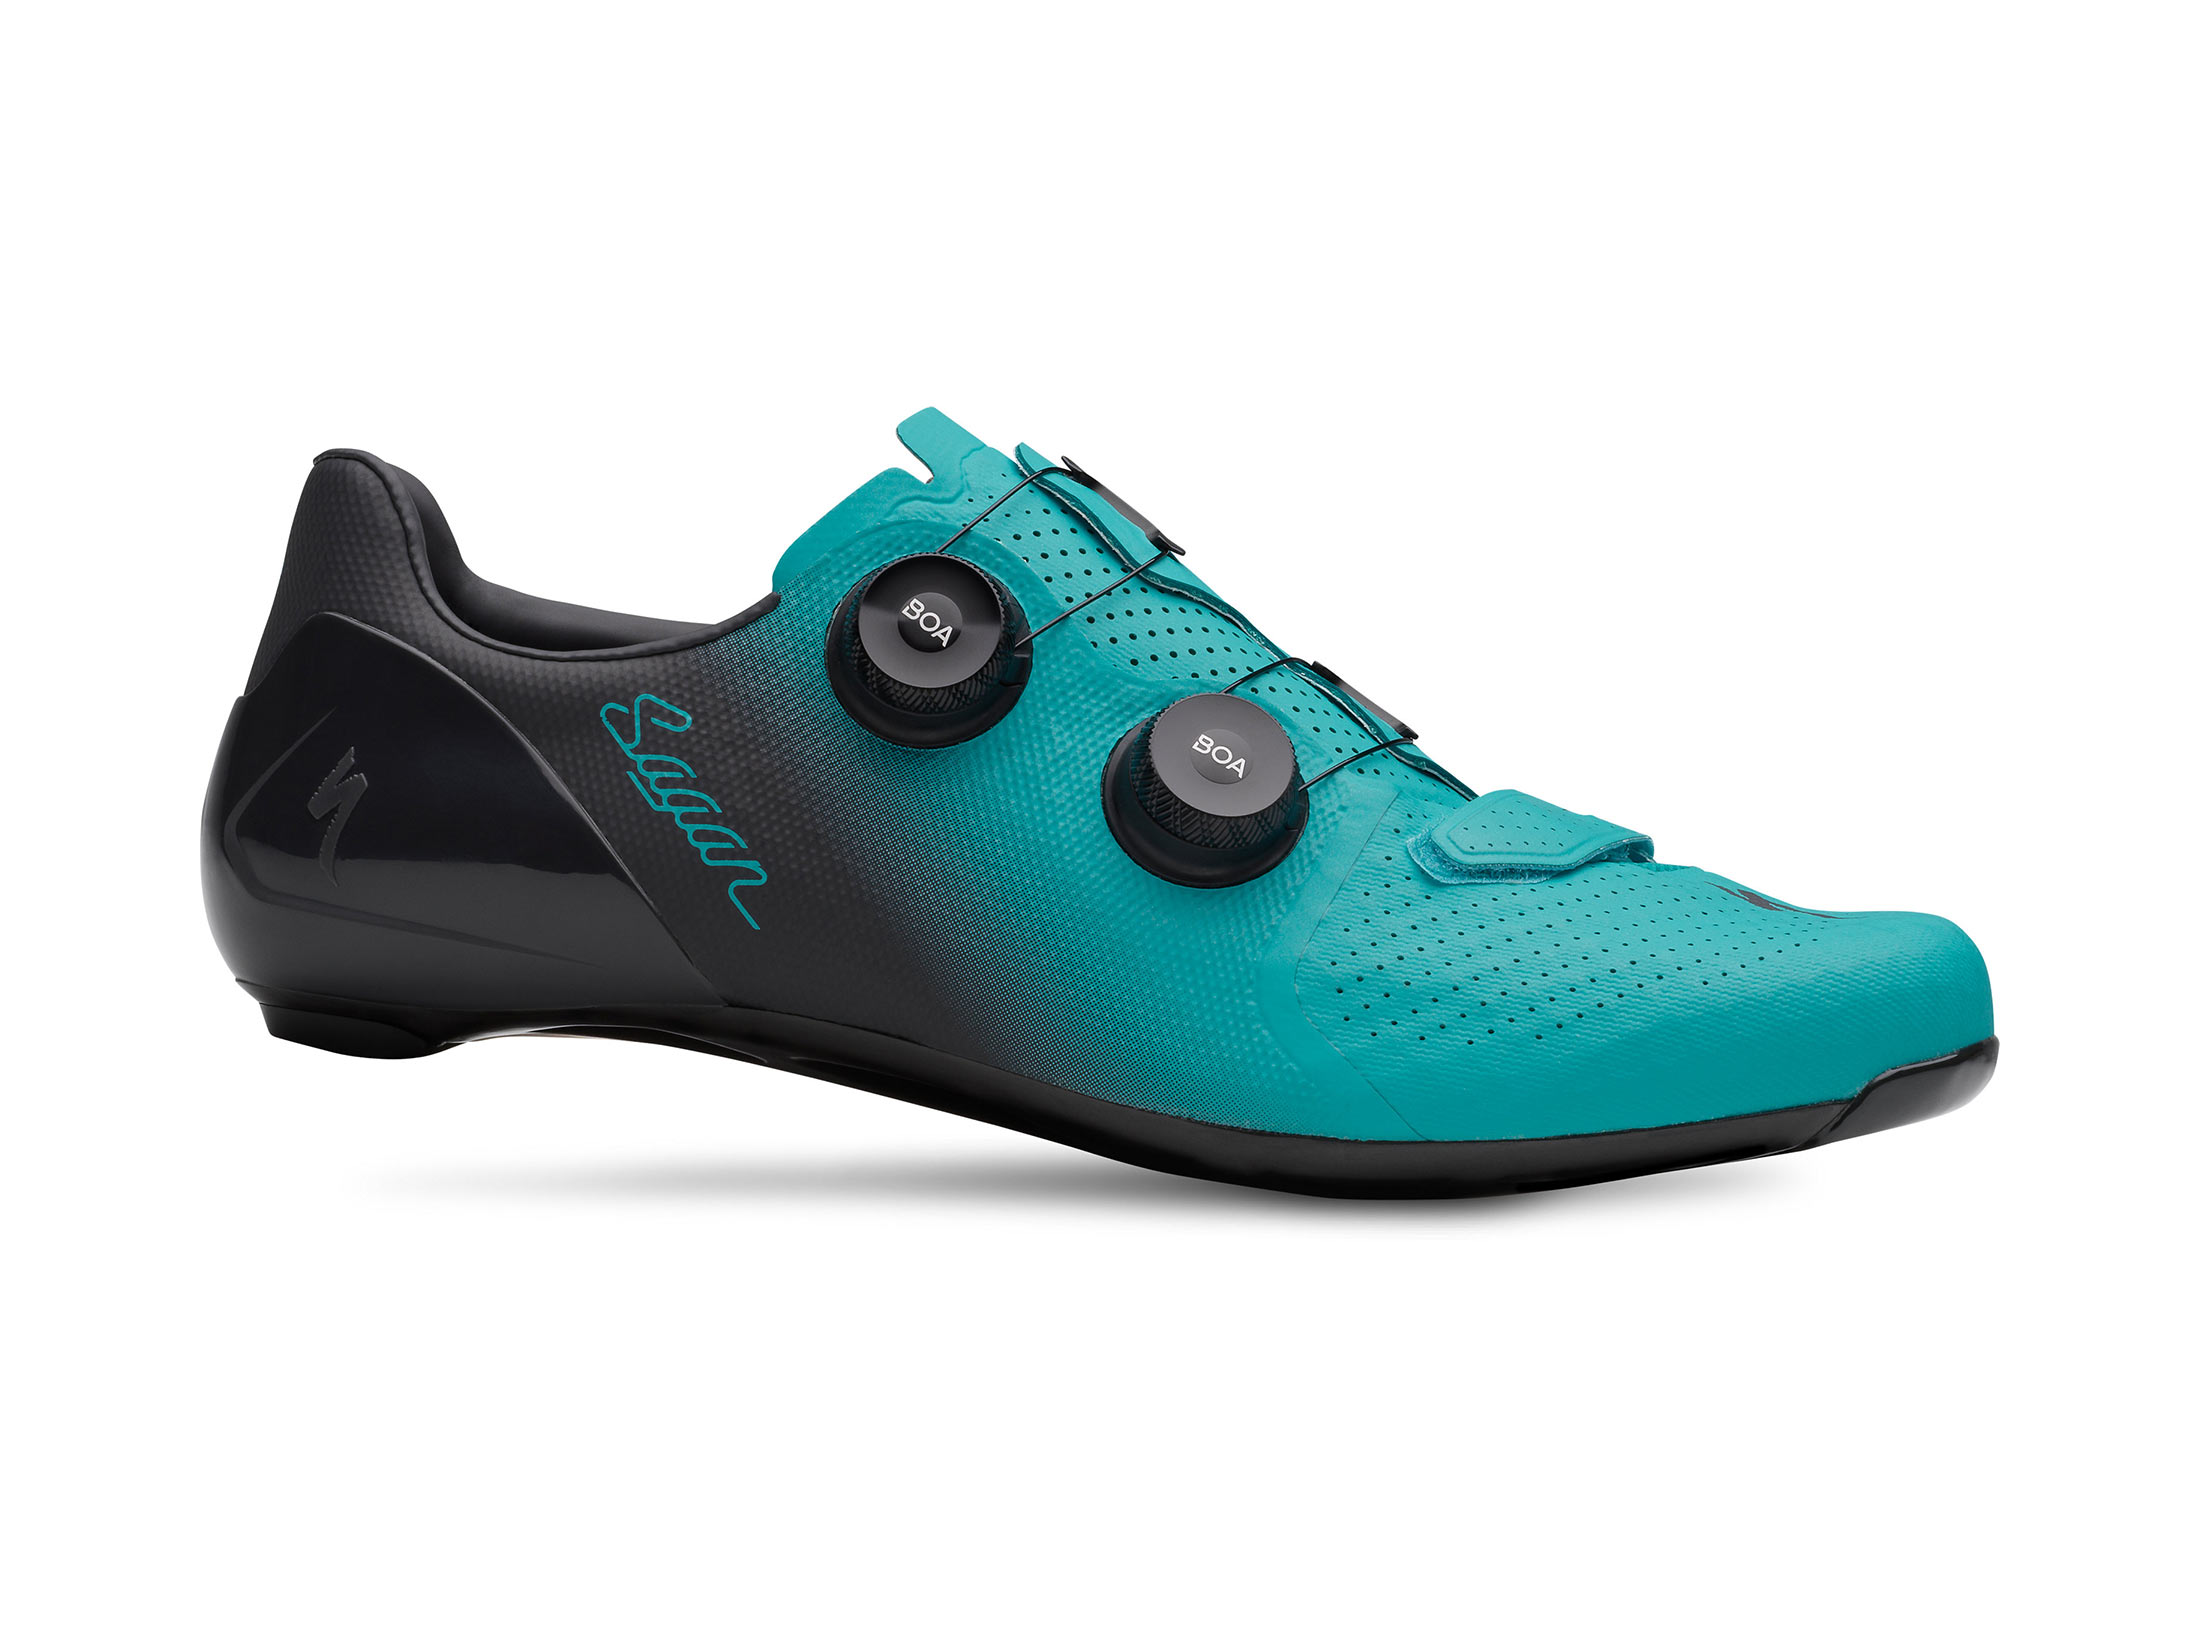 Specialized S-Works 7 Road Shoes - Sagan Collection LTD - 2019